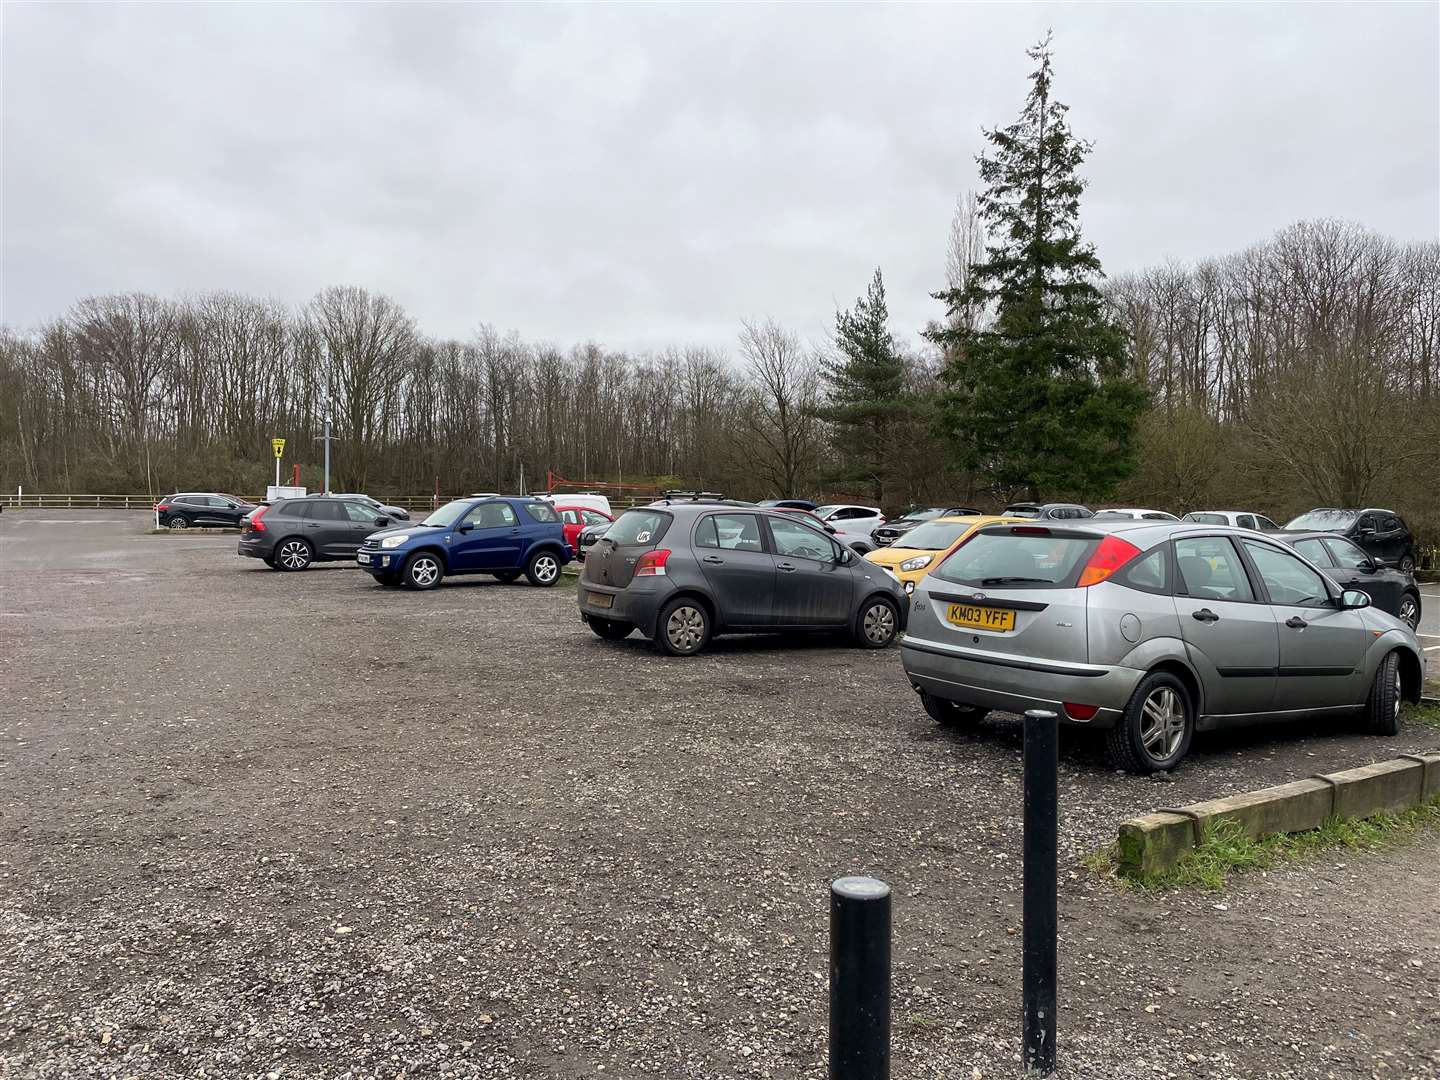 You need to pay to park at Shorne Wood Country Park